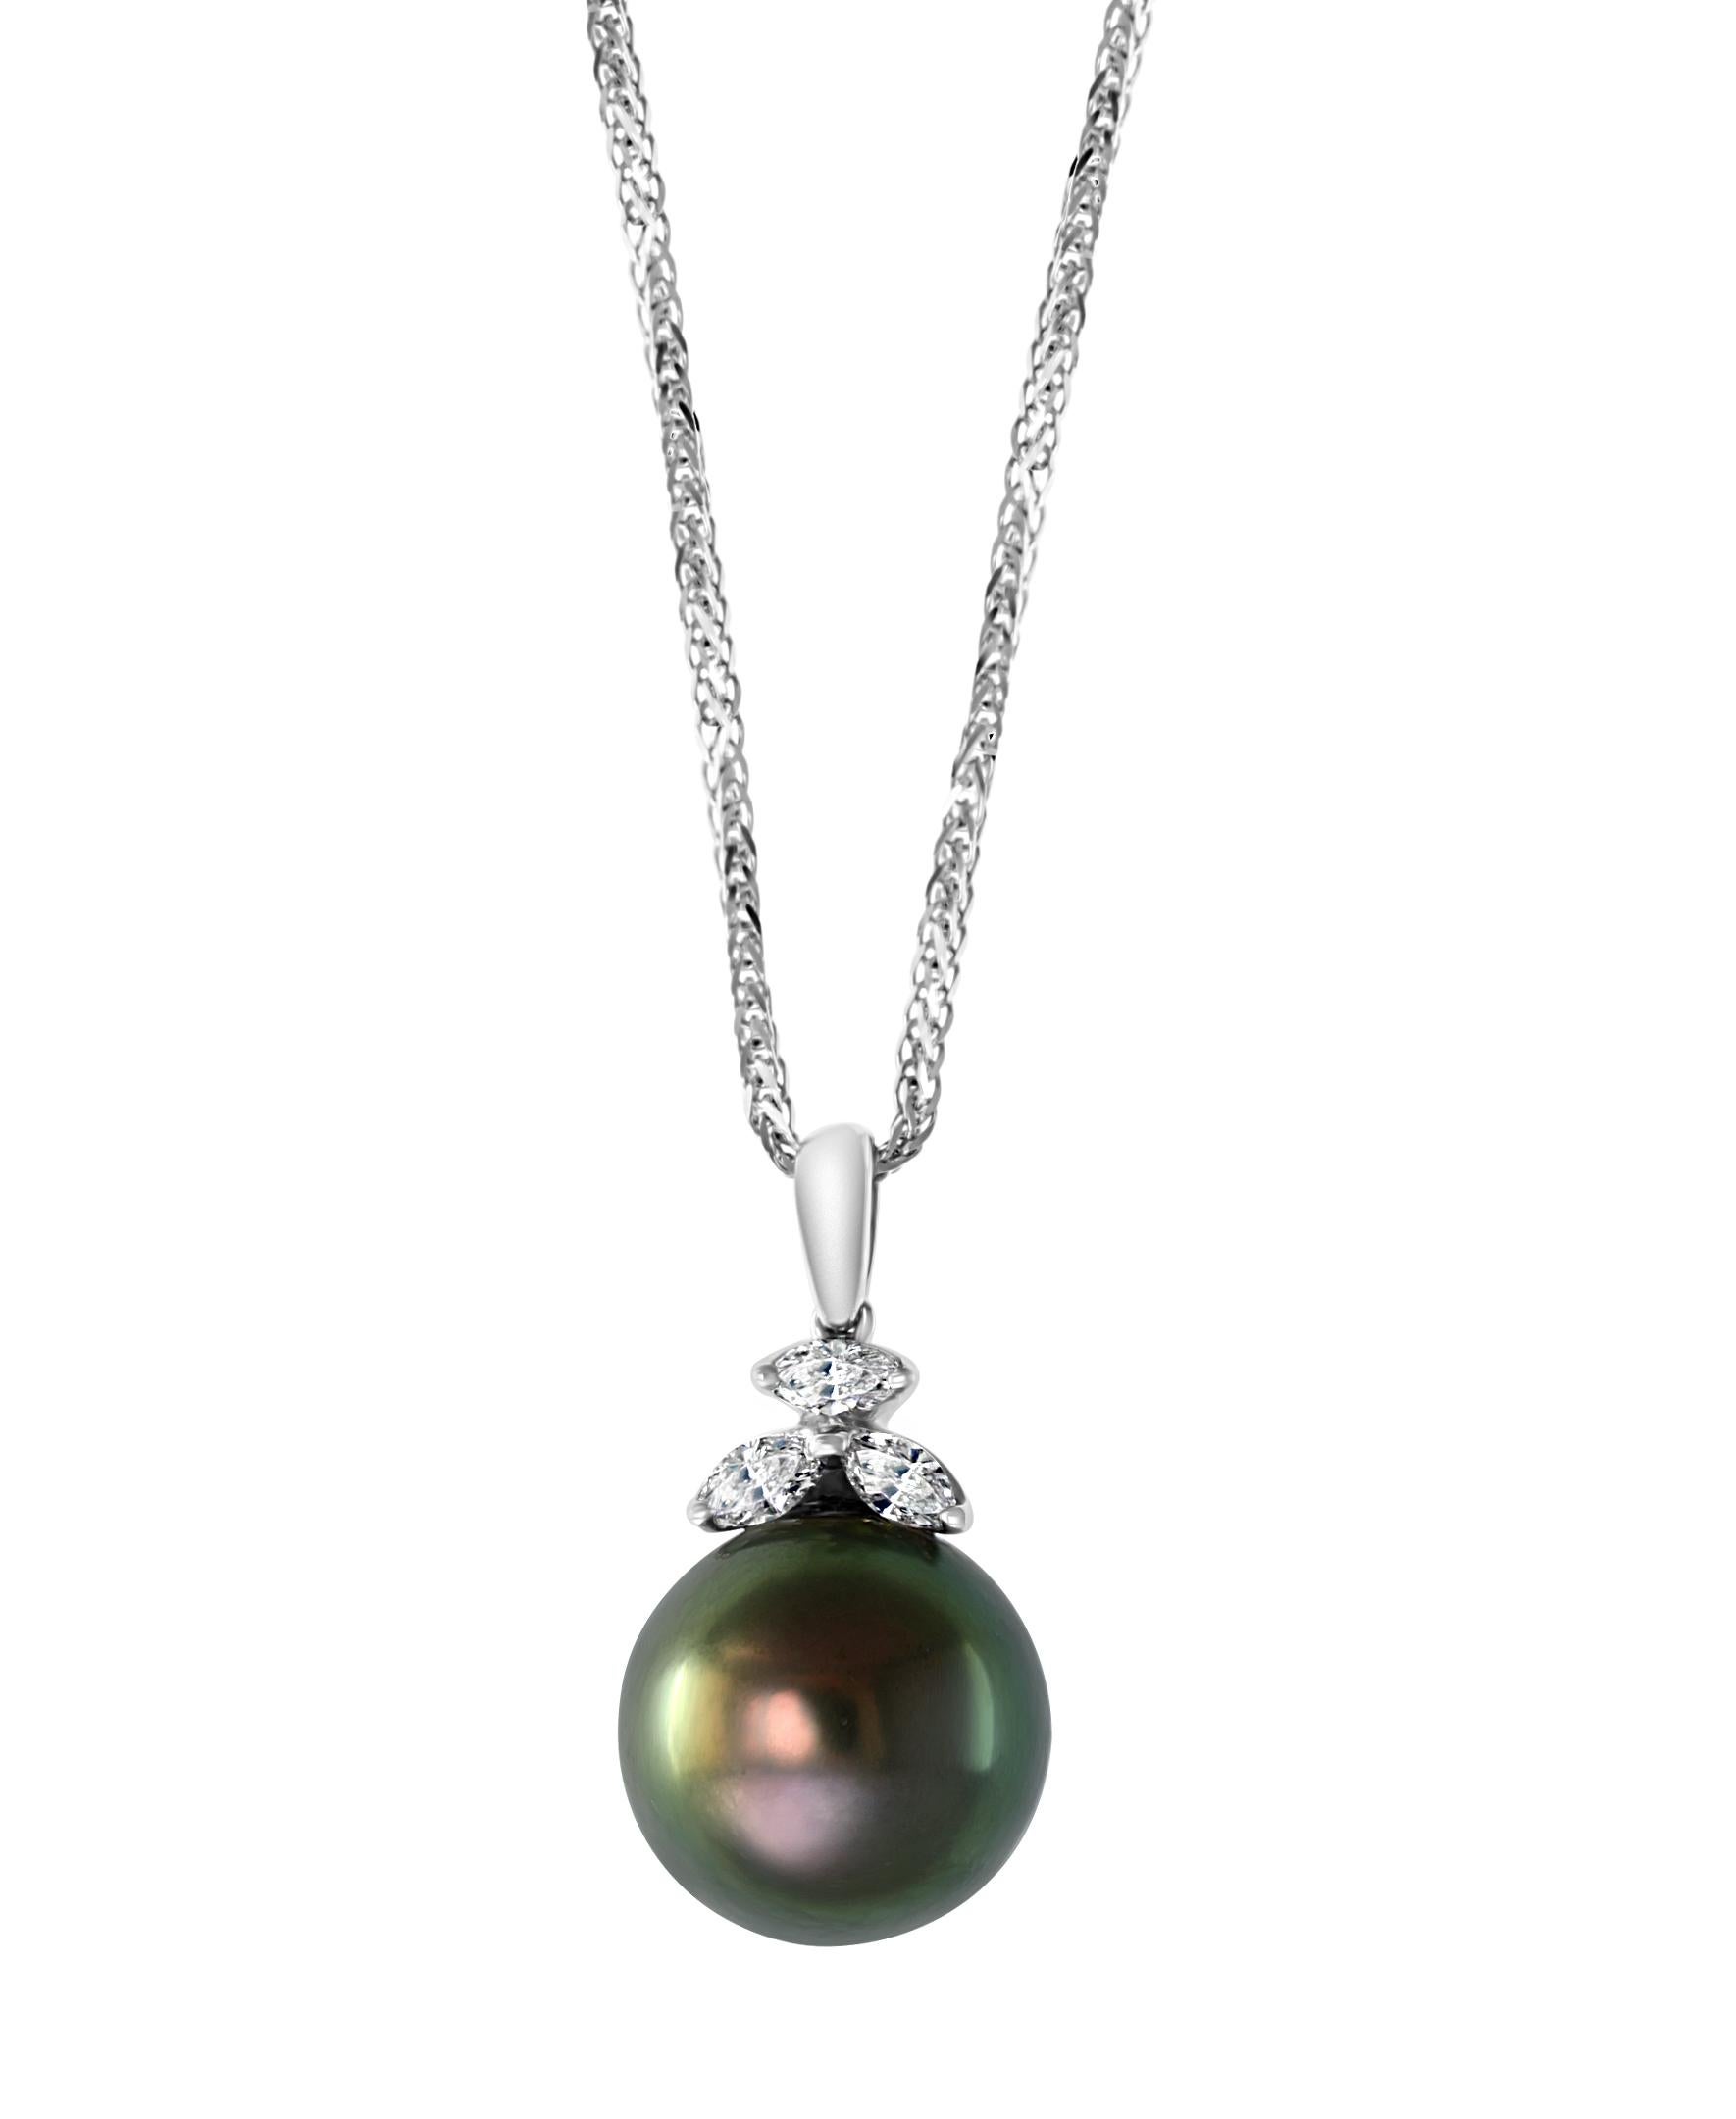 12 MM Black Tahitian Pearl & Diamond Pendant / Necklace 18 Karat Gold With Chain
A  Beautiful Necklace for every day , work or small get together.
 12 mm Pearl very clean , in round shape , full of luster and shine  . 
3  pieces of Marquis diamonds 